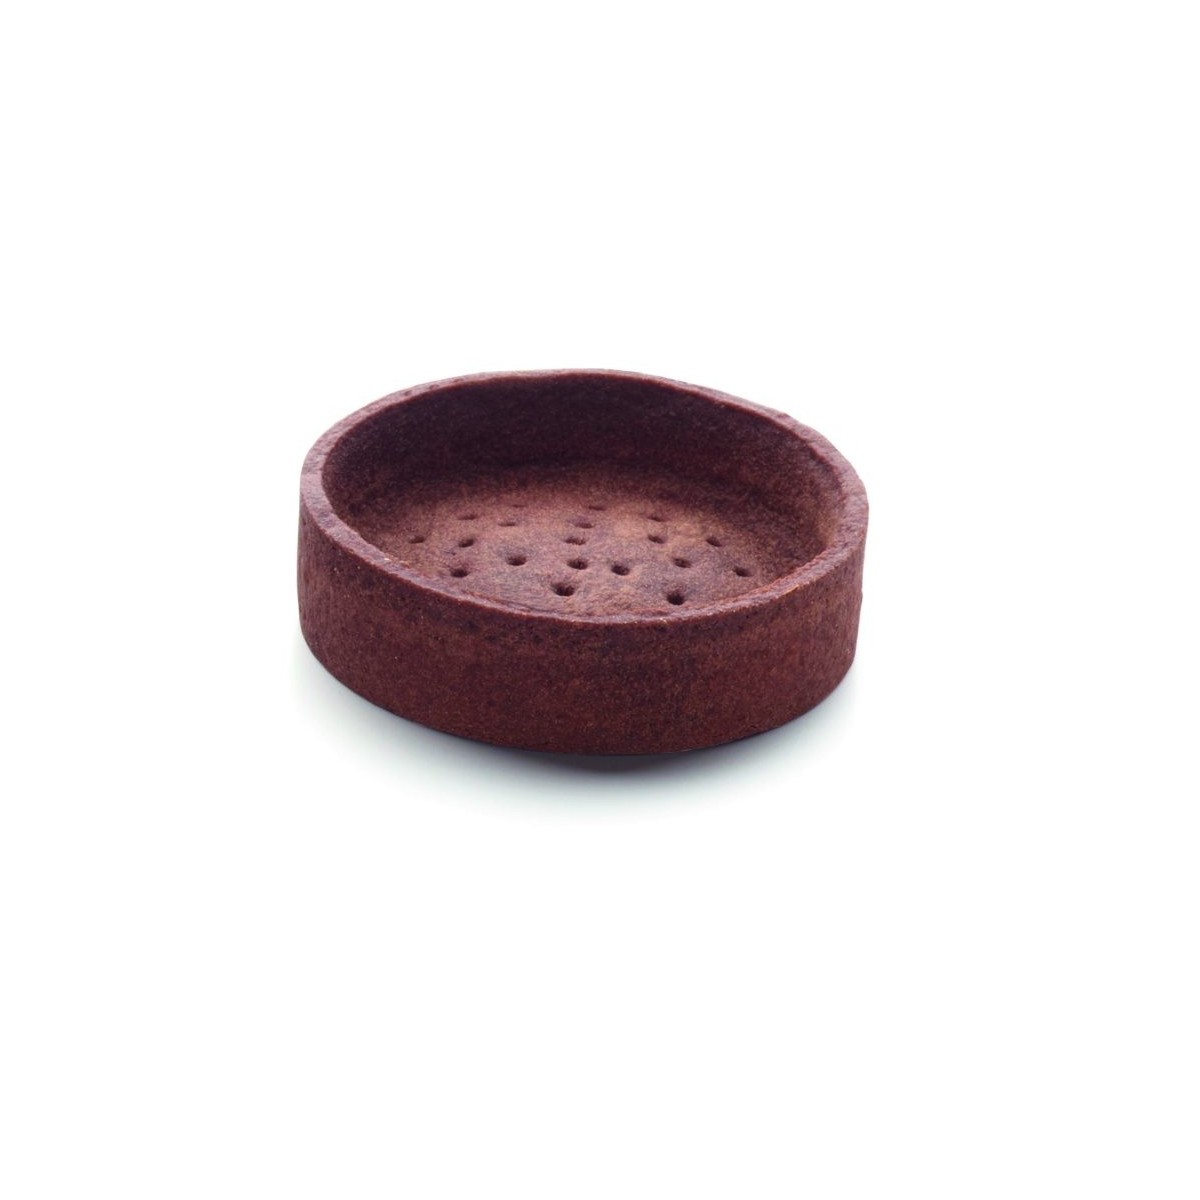 PIDY SANDED CHOCOLATE TARTLET Ø8CM RIGHT EDGE TRENDY SHELL 96 PIECES  CARTON ON/ORDER